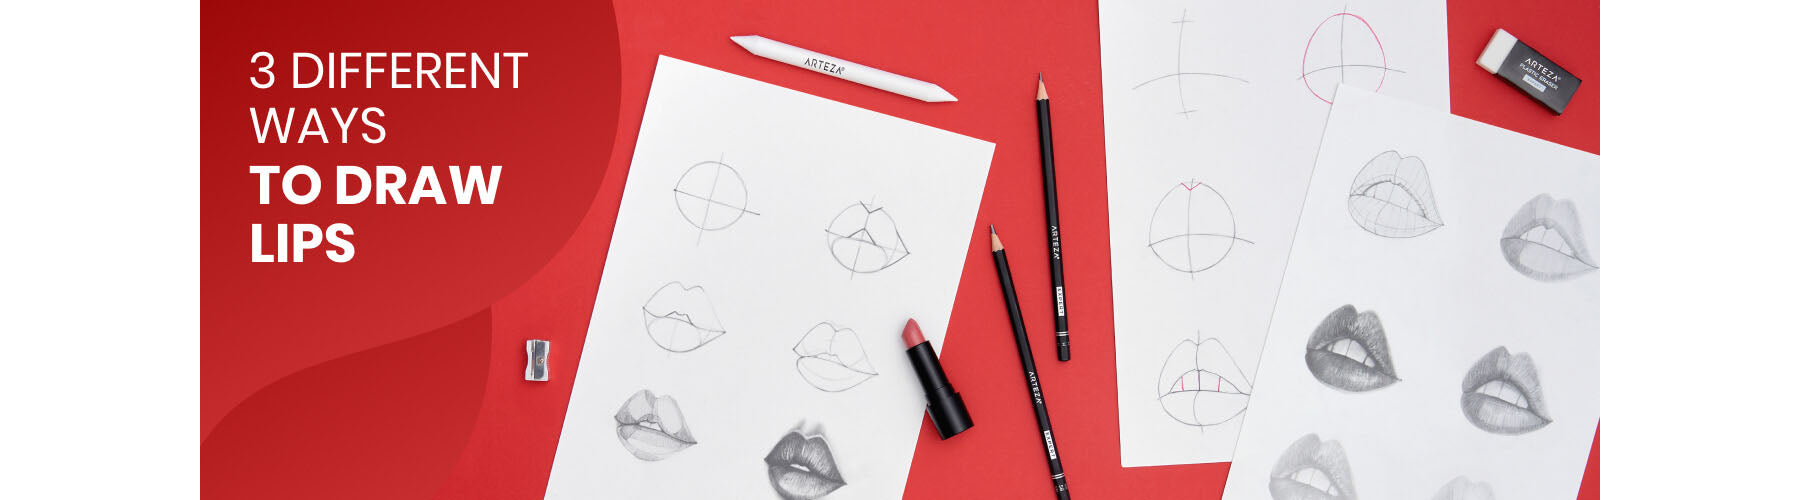 Learn to Sketch Better Portraits With Just 3 Simple Tips!